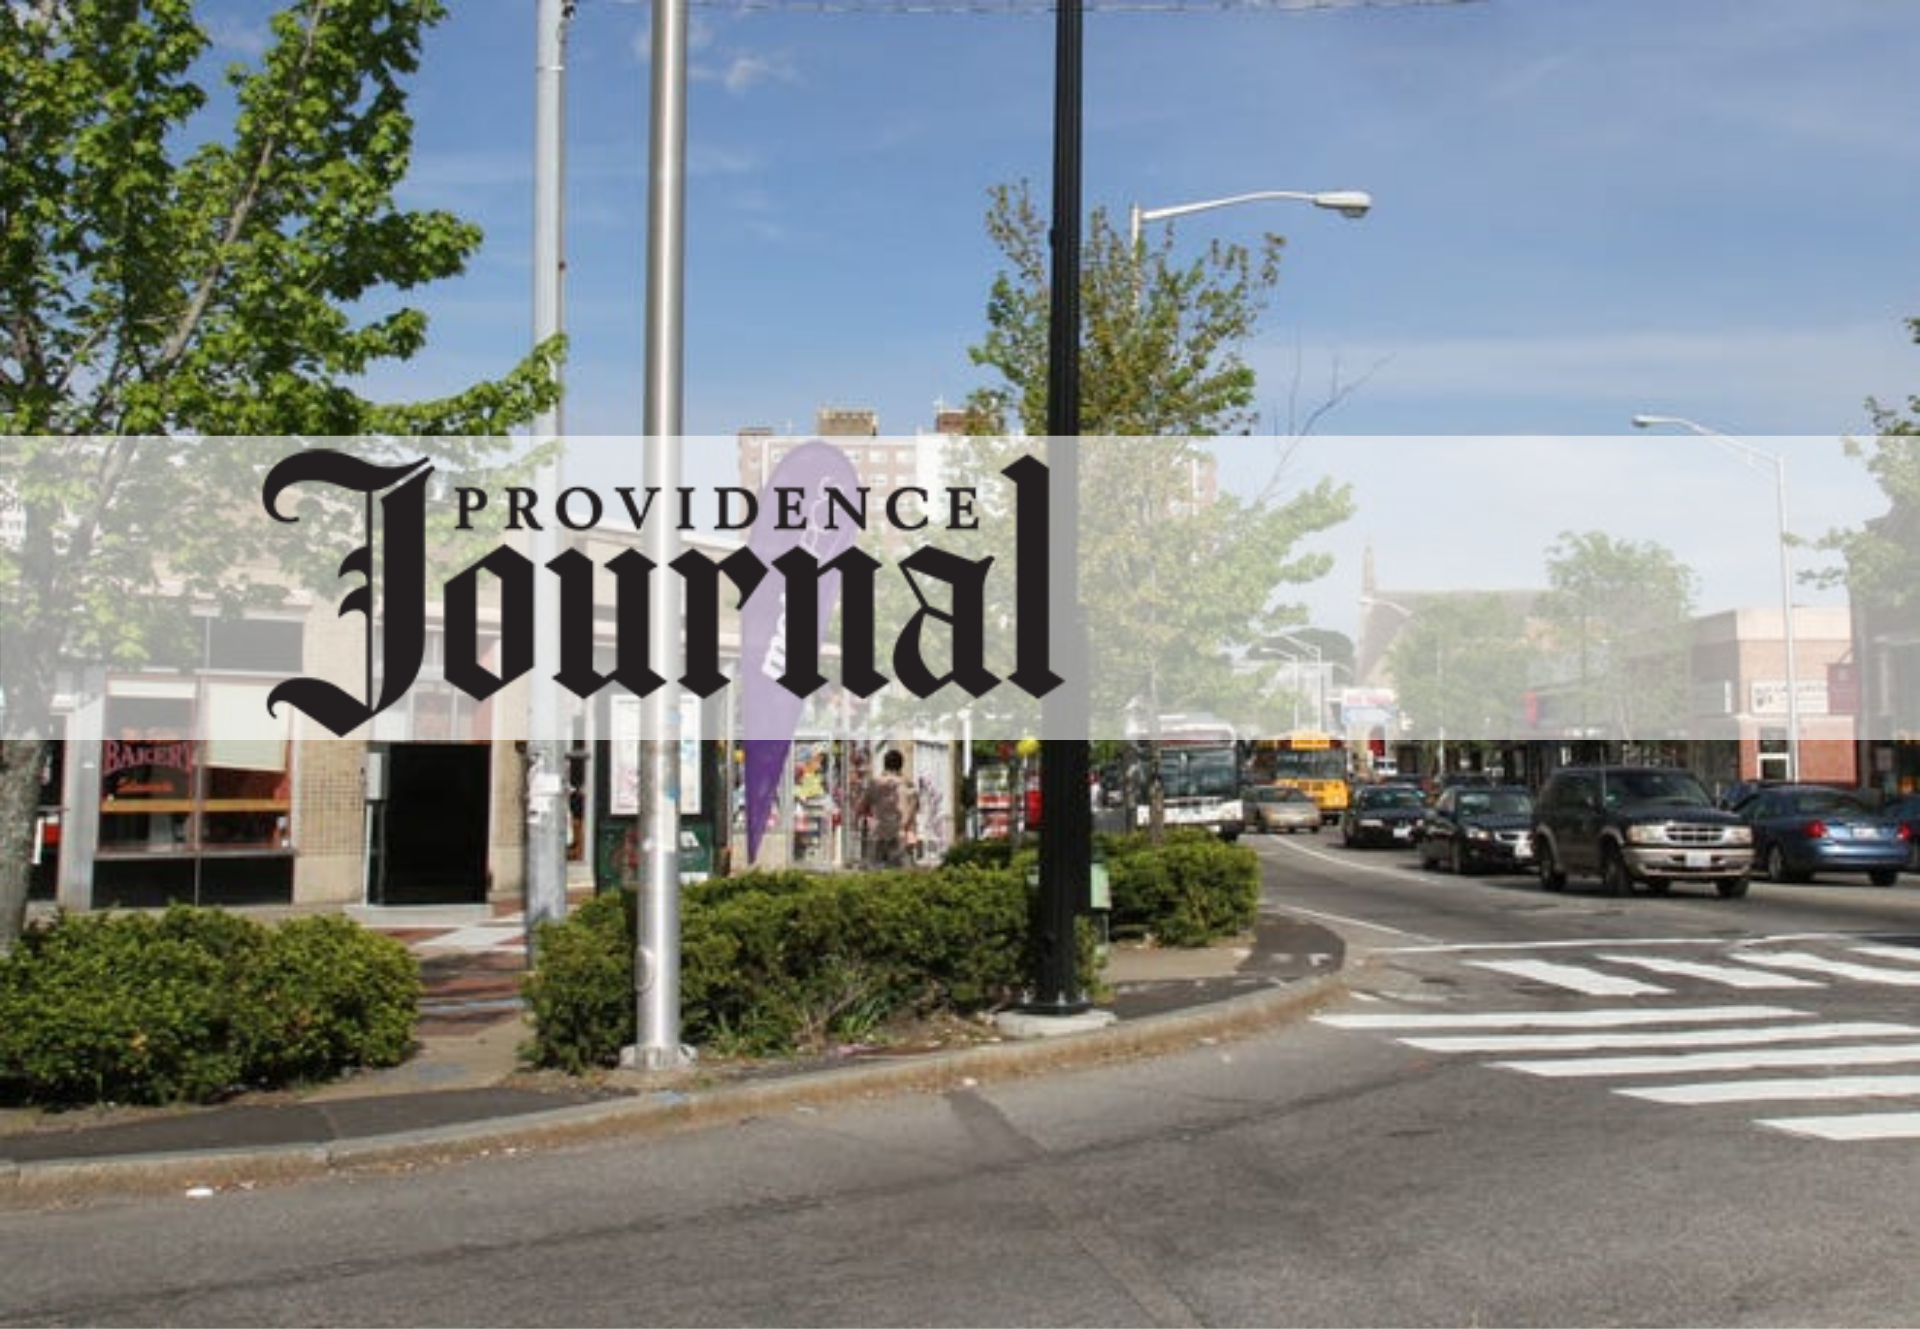 $8-million grant aimed at helping 2 Providence zip codes